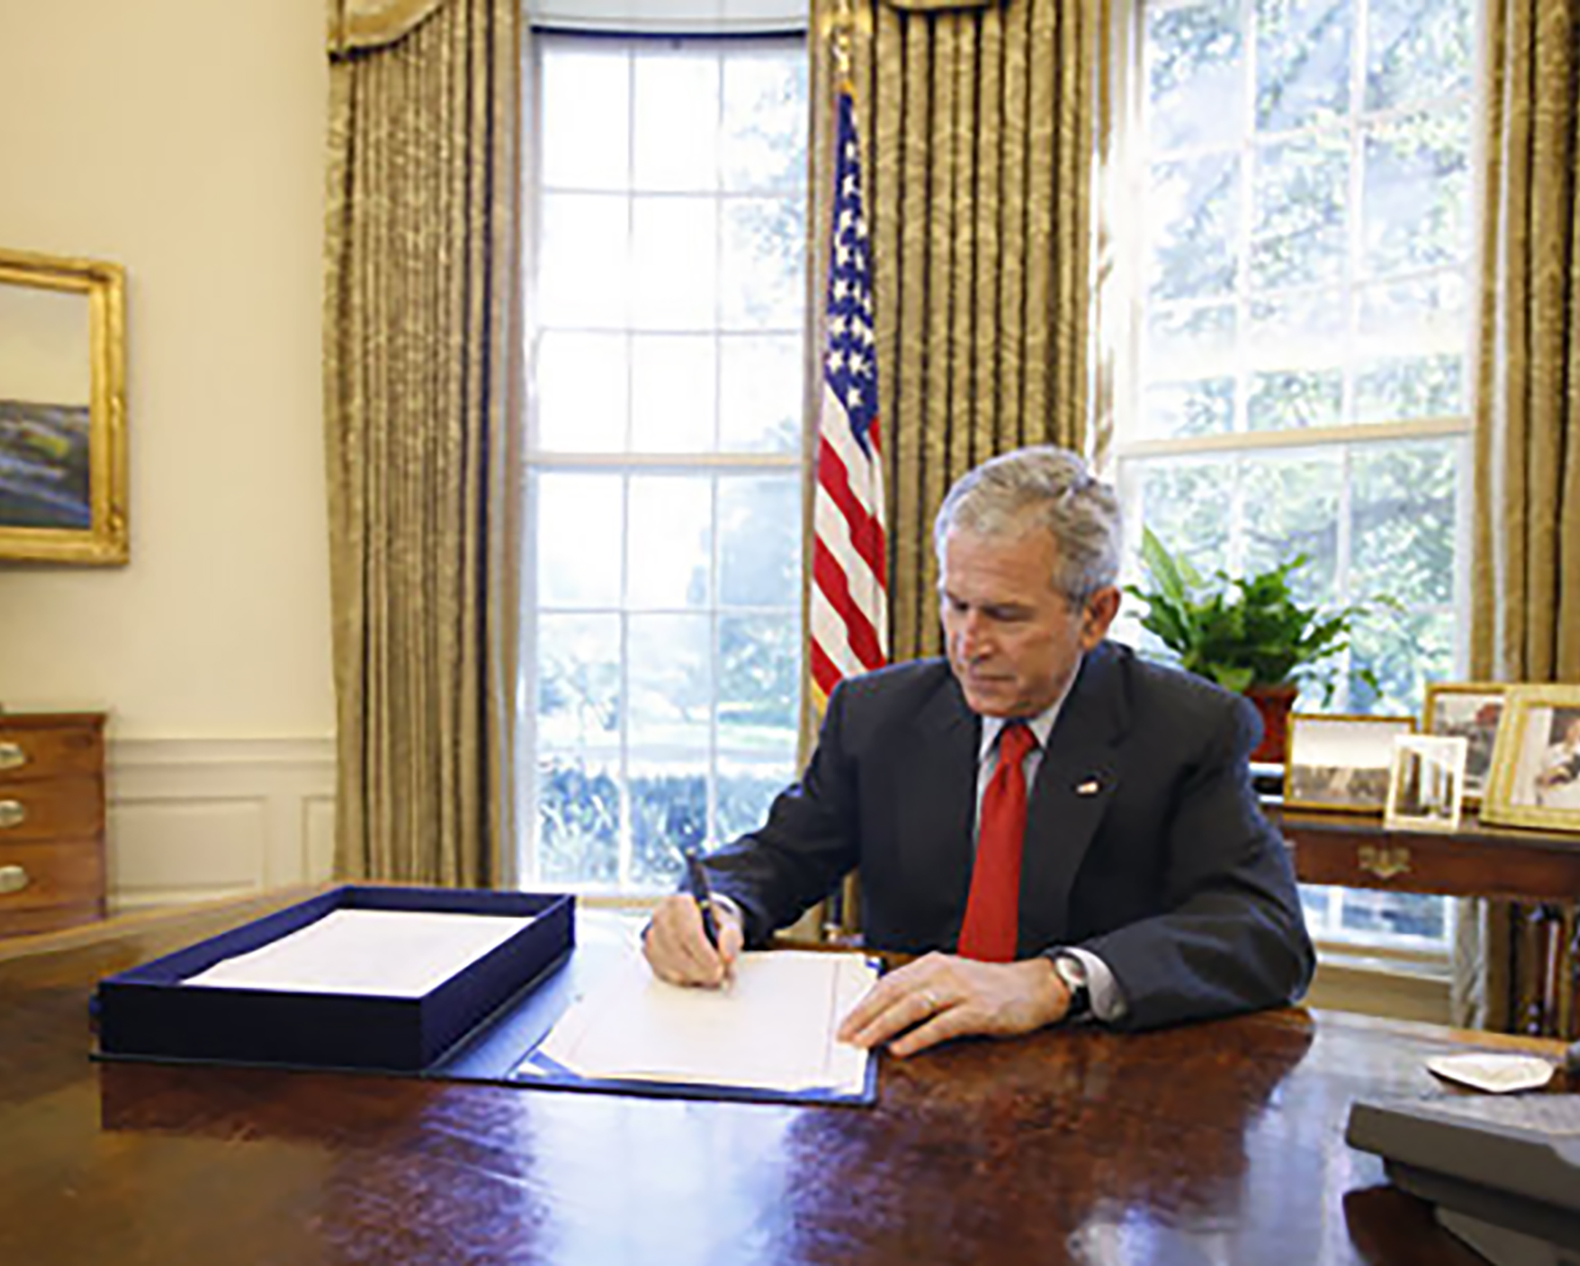 October 3, 2008 - The Emergency Economic Stabilization Act of 2008 is signed into law by President George W. Bush.